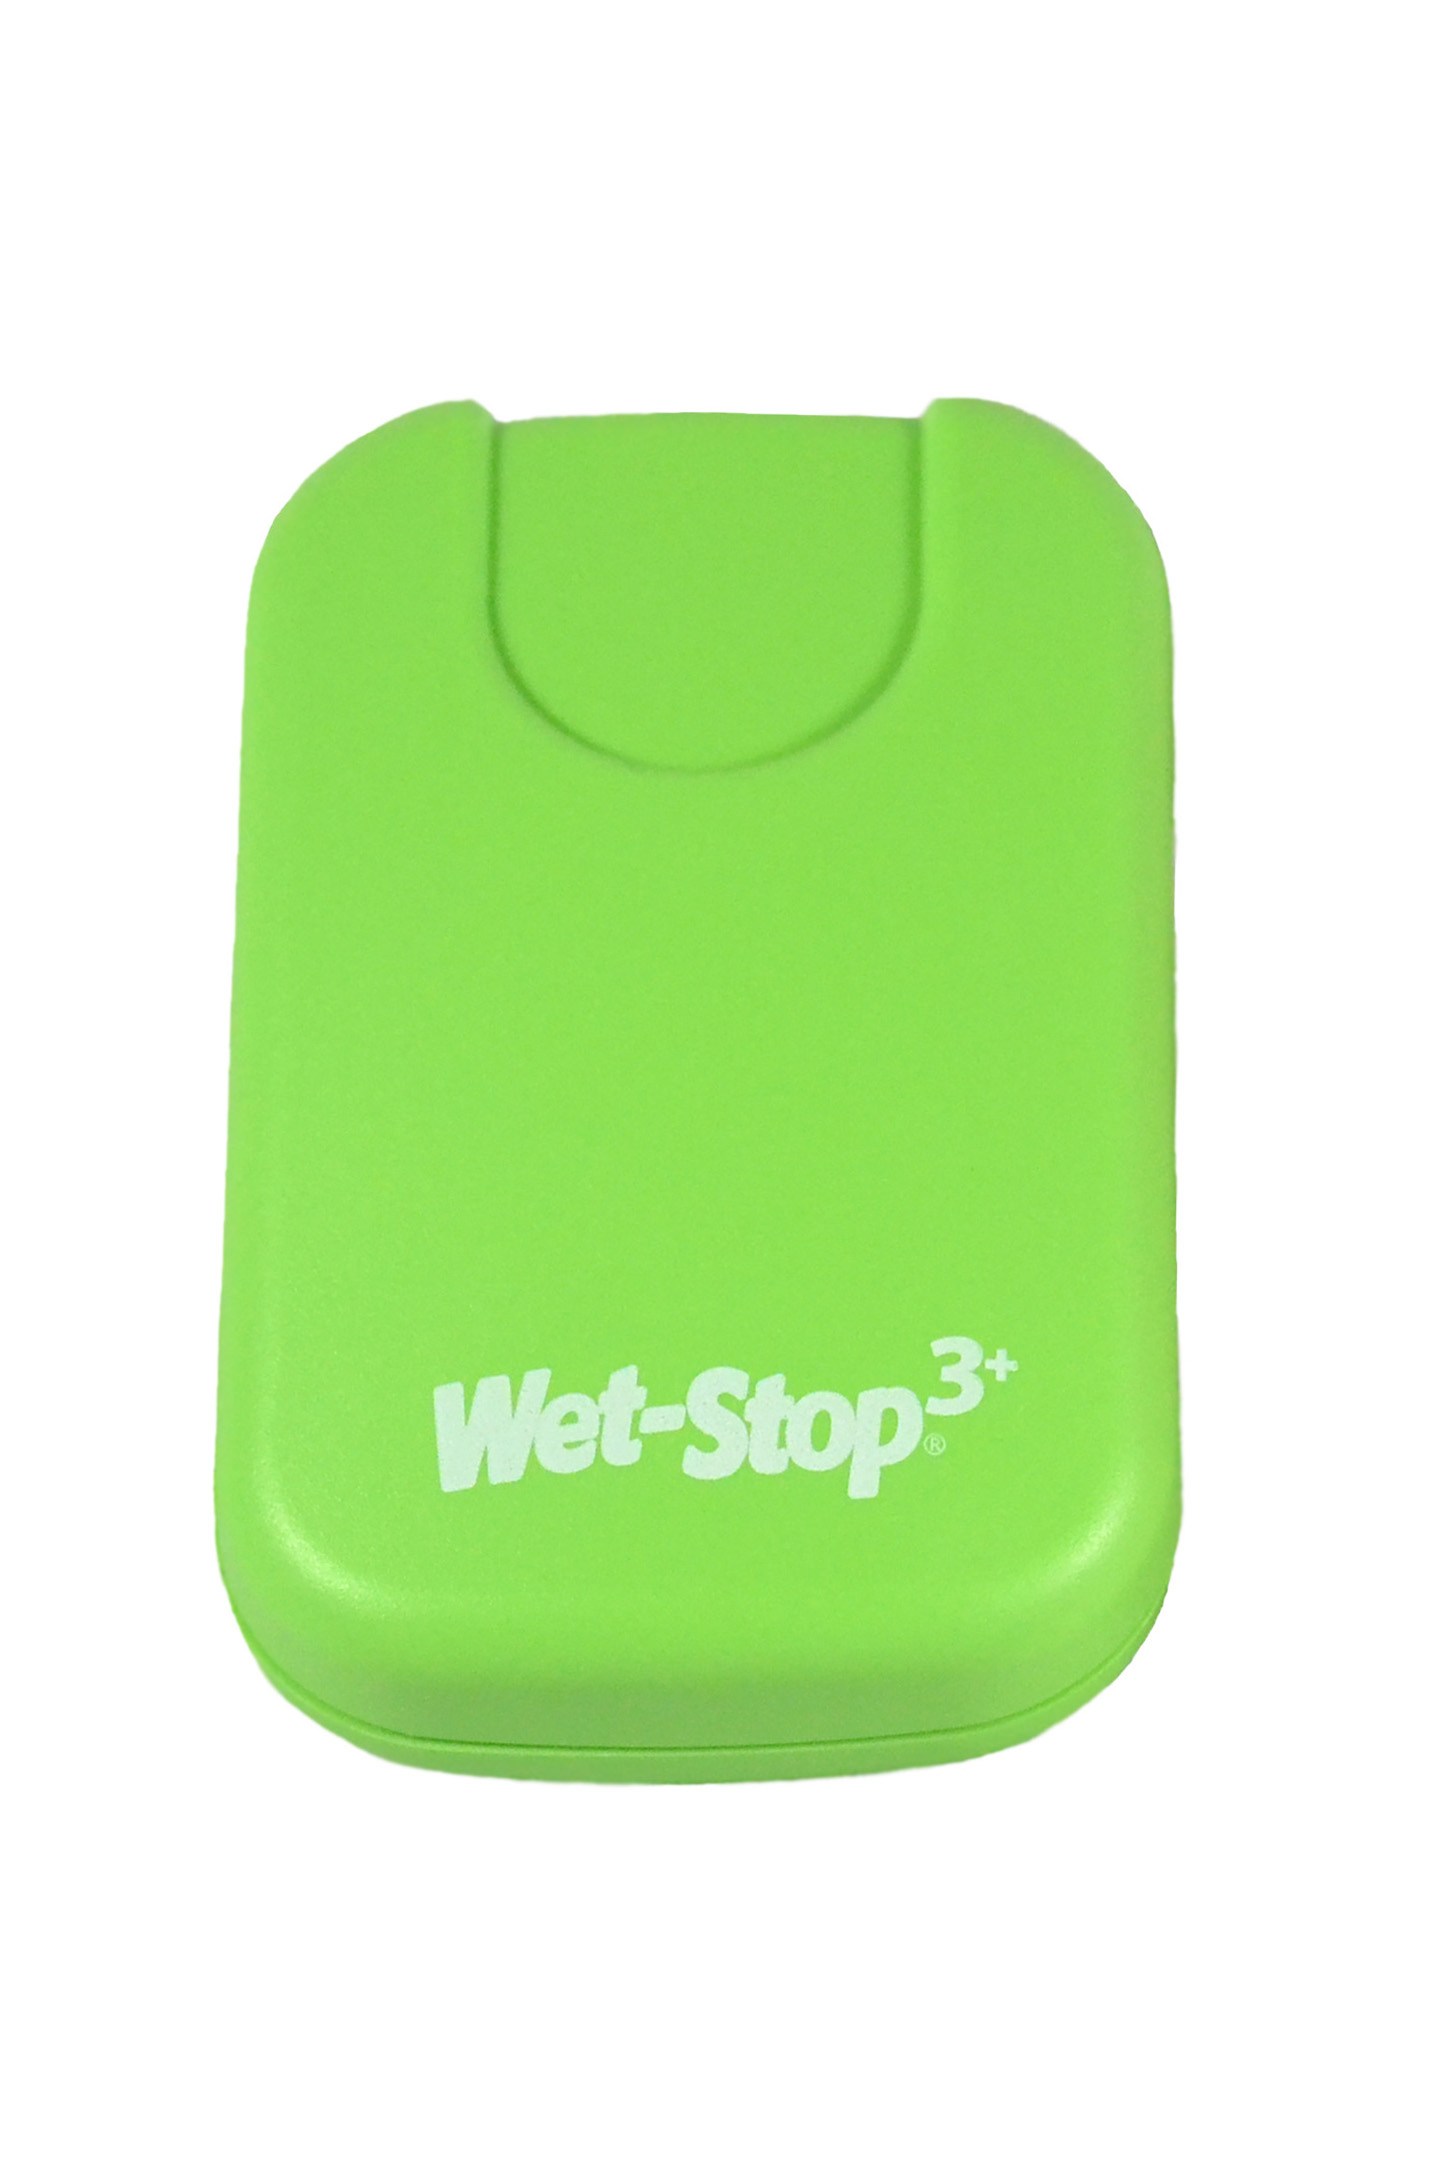 Wet-Stop 3+ Bedwetting Alarm (Green) - FREE SHIPPING • Wet-Stop